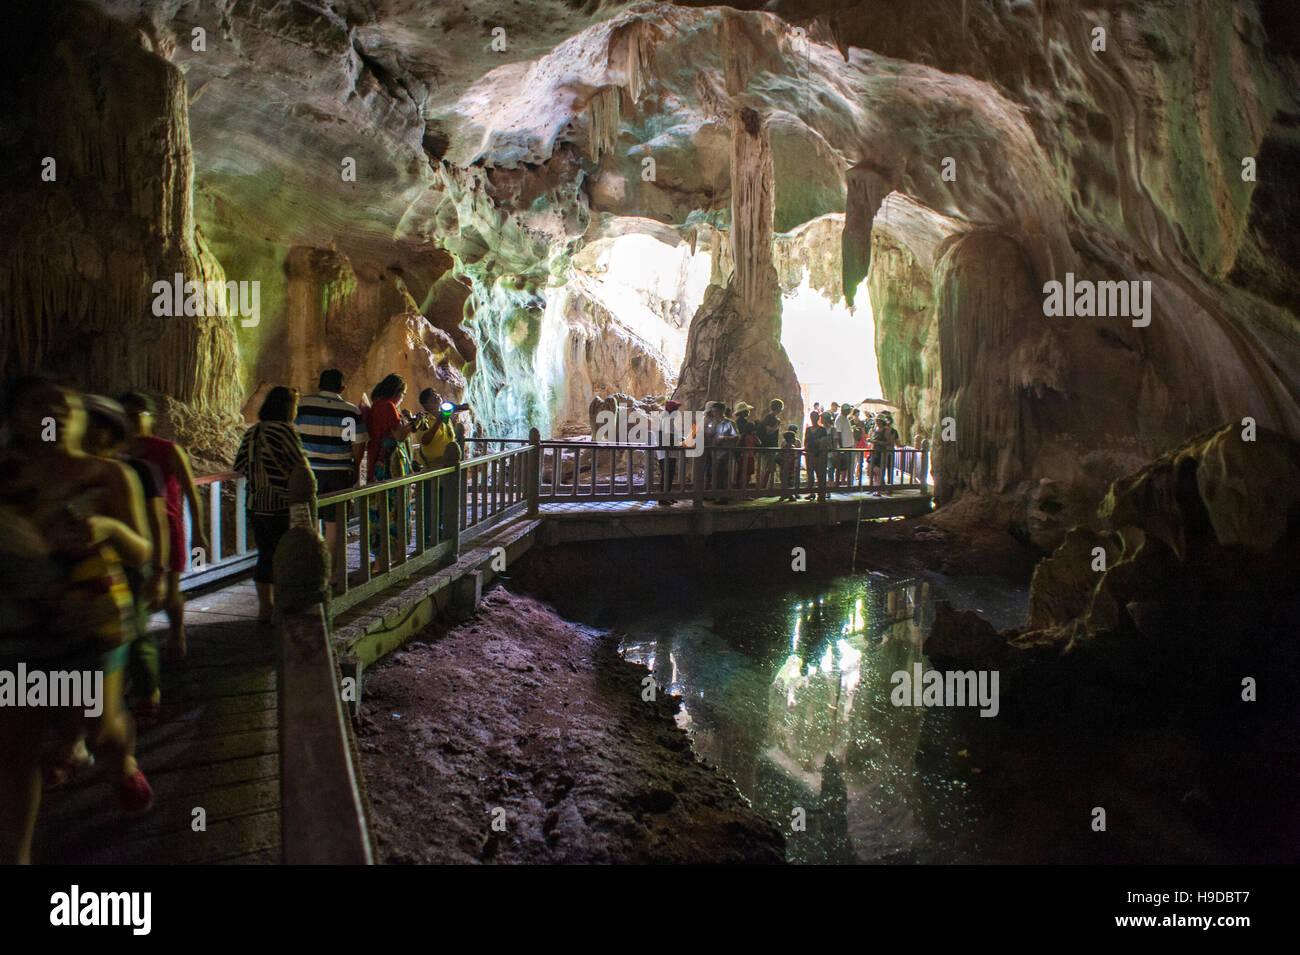 Tourists wander though the Bat Cave at the Kilim Karst Geoforest Park in Langkawi, an island in north West Malaysia. Stock Photo